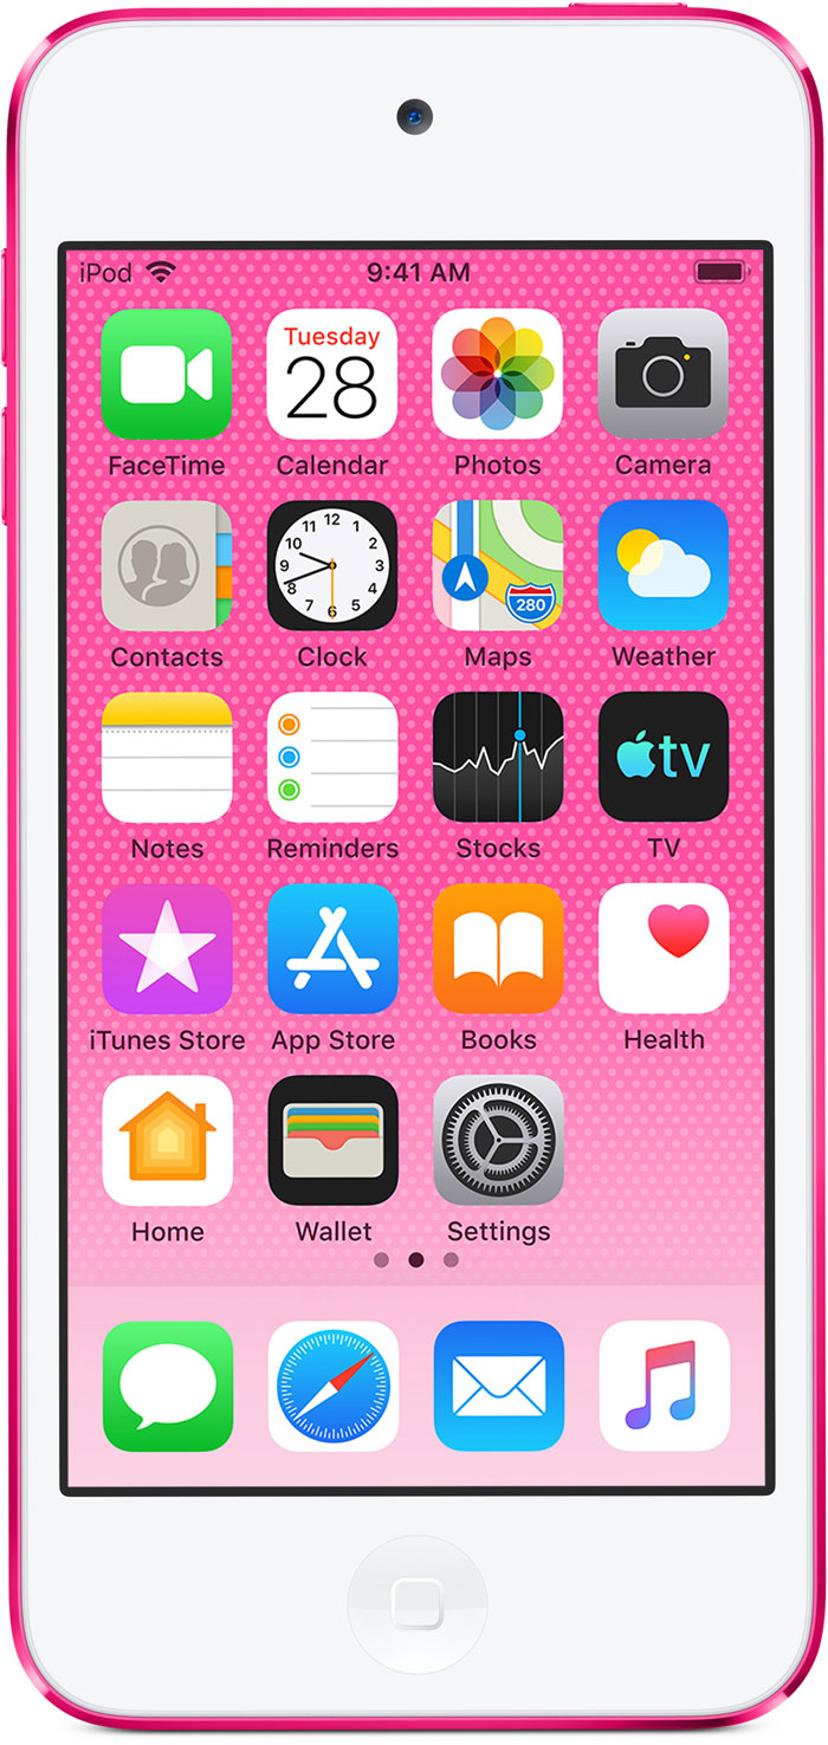 Apple iPod Touch 32GB - Pink